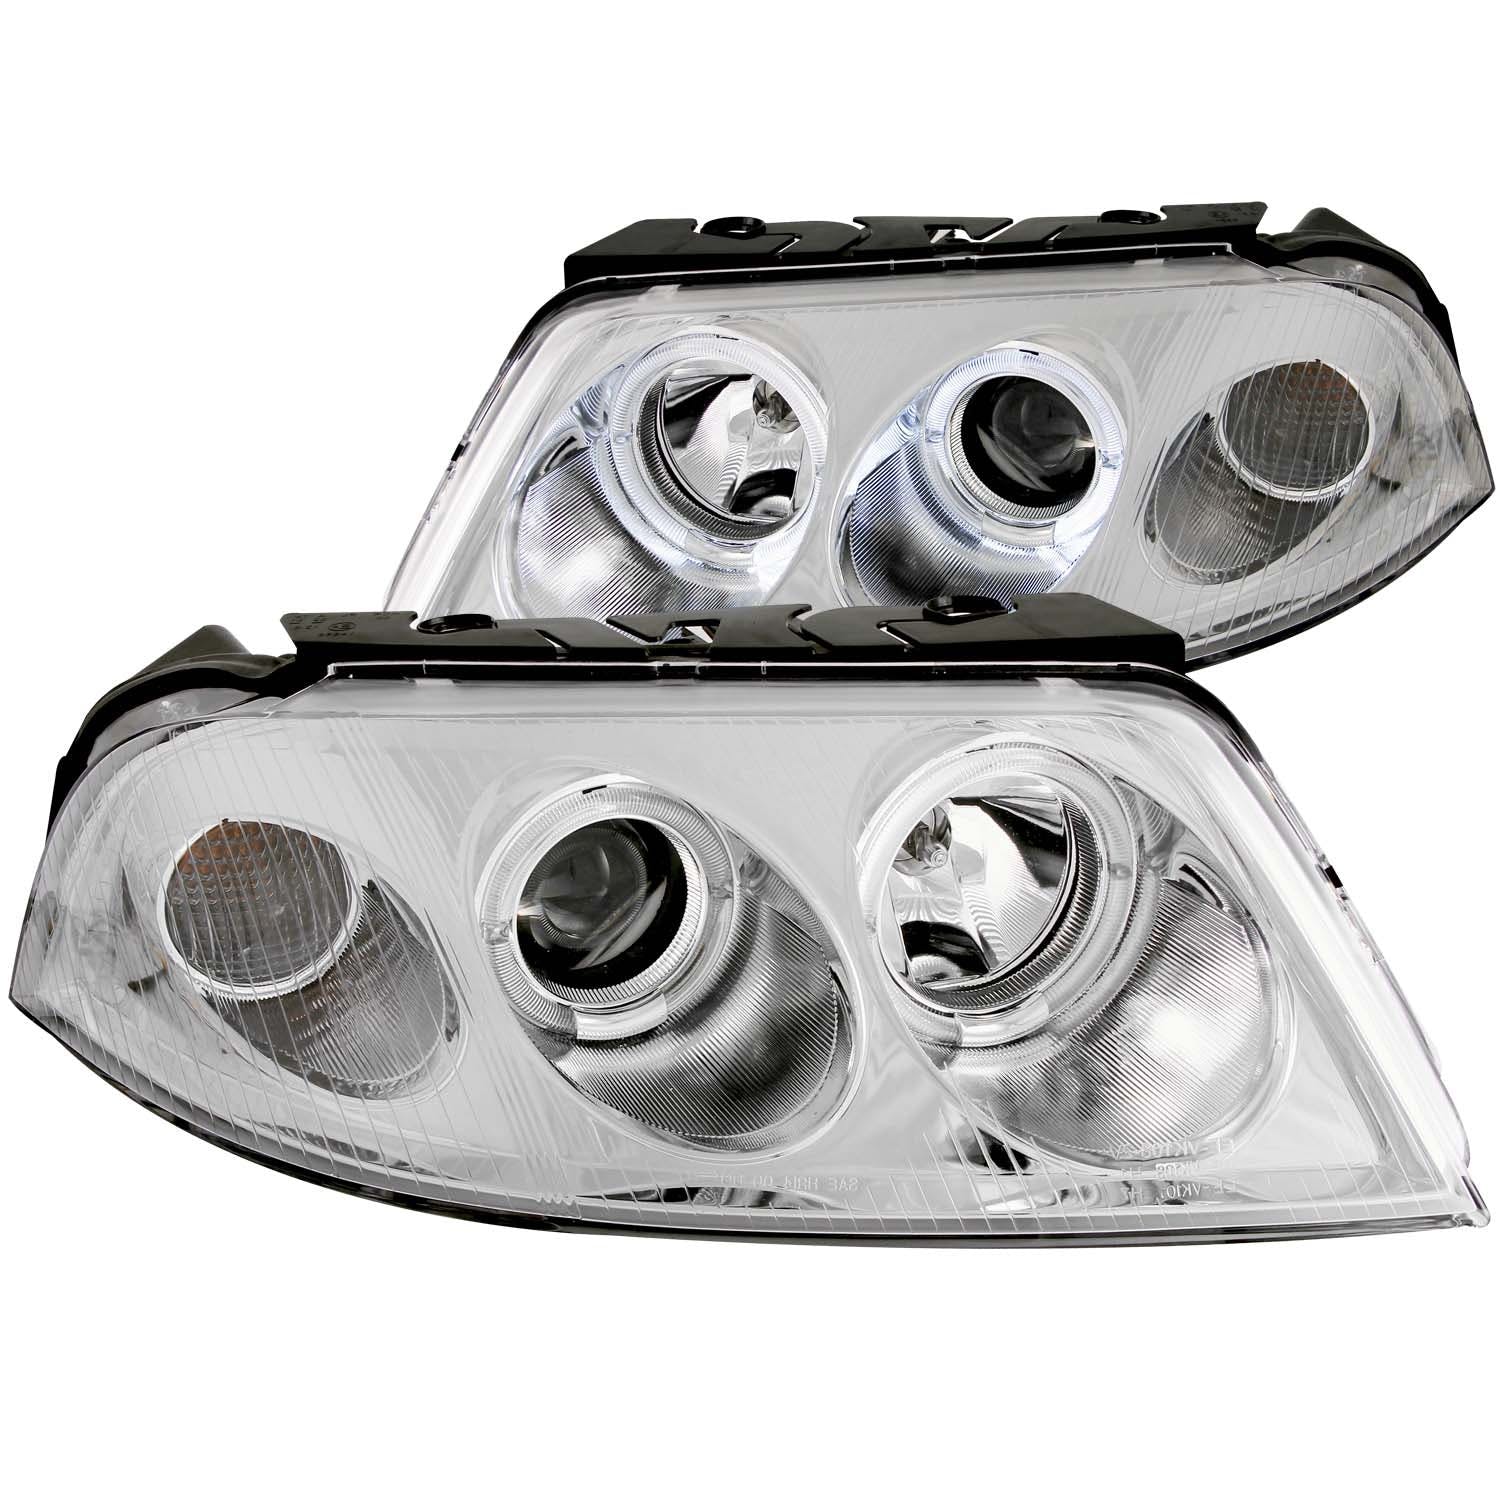 AnzoUSA 121358 Projector Headlights with Halo Chrome